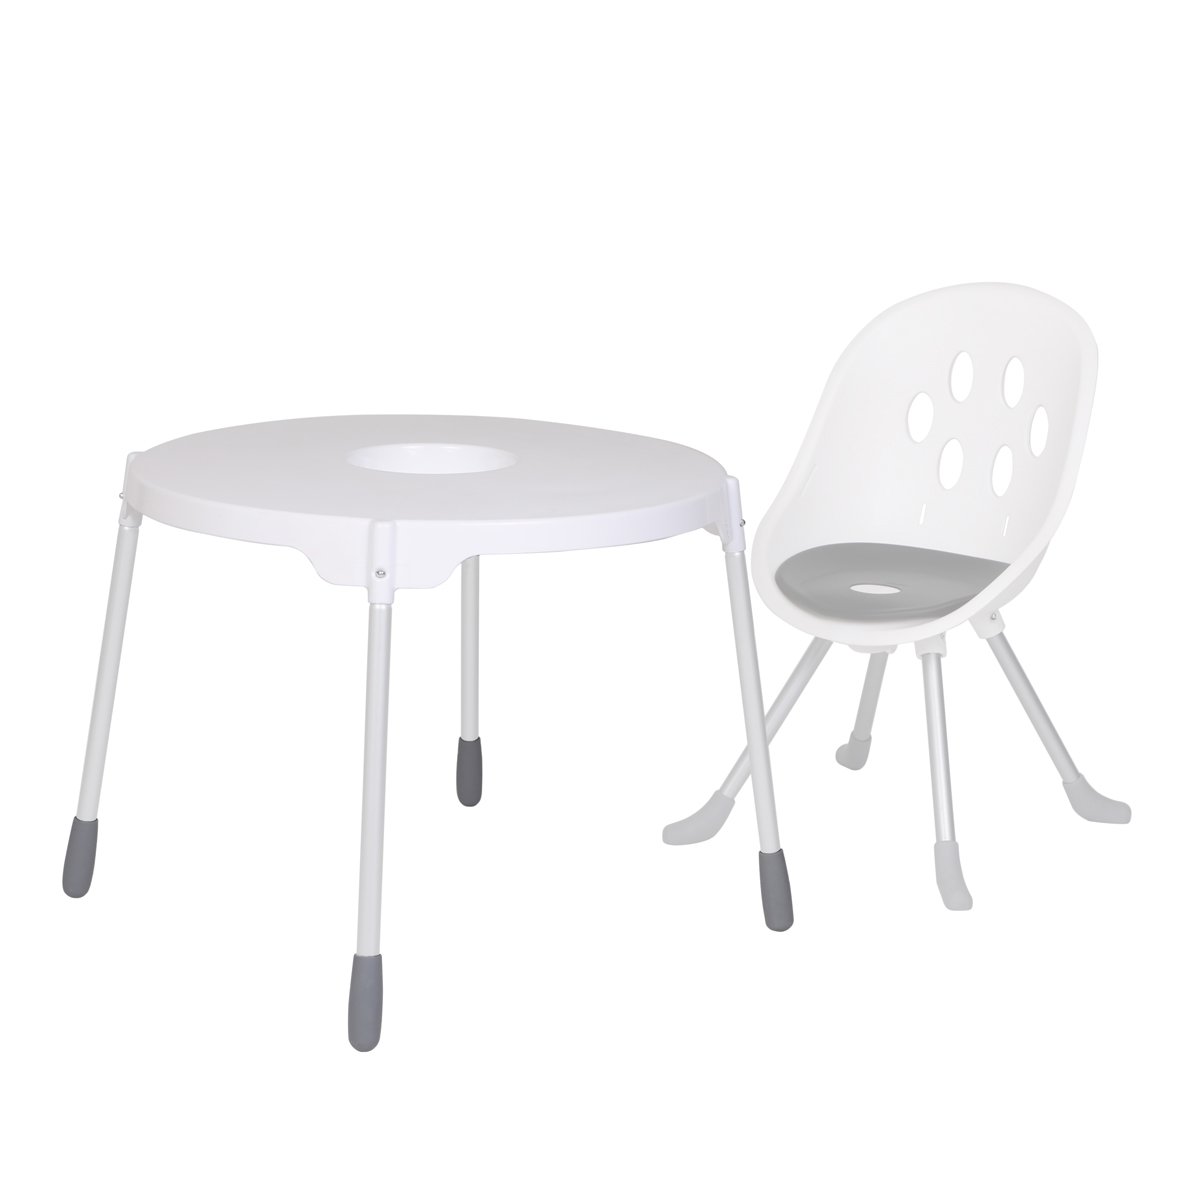 https://cdn.accentuate.io/4615341604917/19118870462517/phil_and_teds_poppy_table_top_with_leg_set_and_poppy_high_chair_1-v1630985321597.jpg?1200x1200